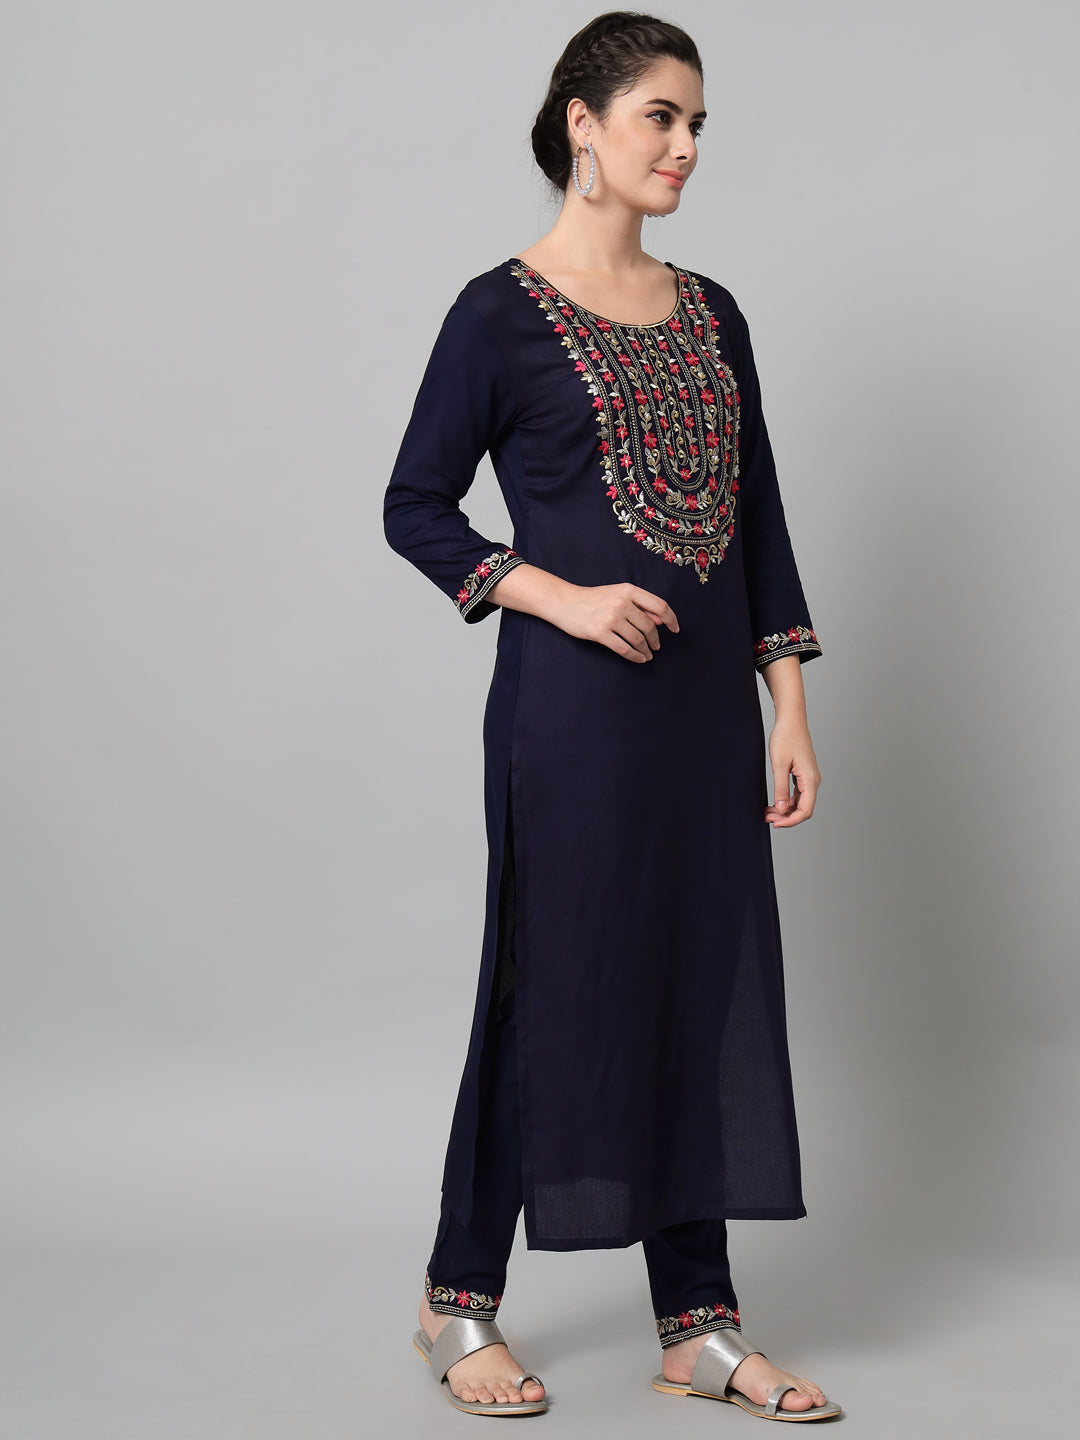 Women's Navy Kurta Trouser Set With Dupatta With Gold And Silver Embroidery - Noz2Toz